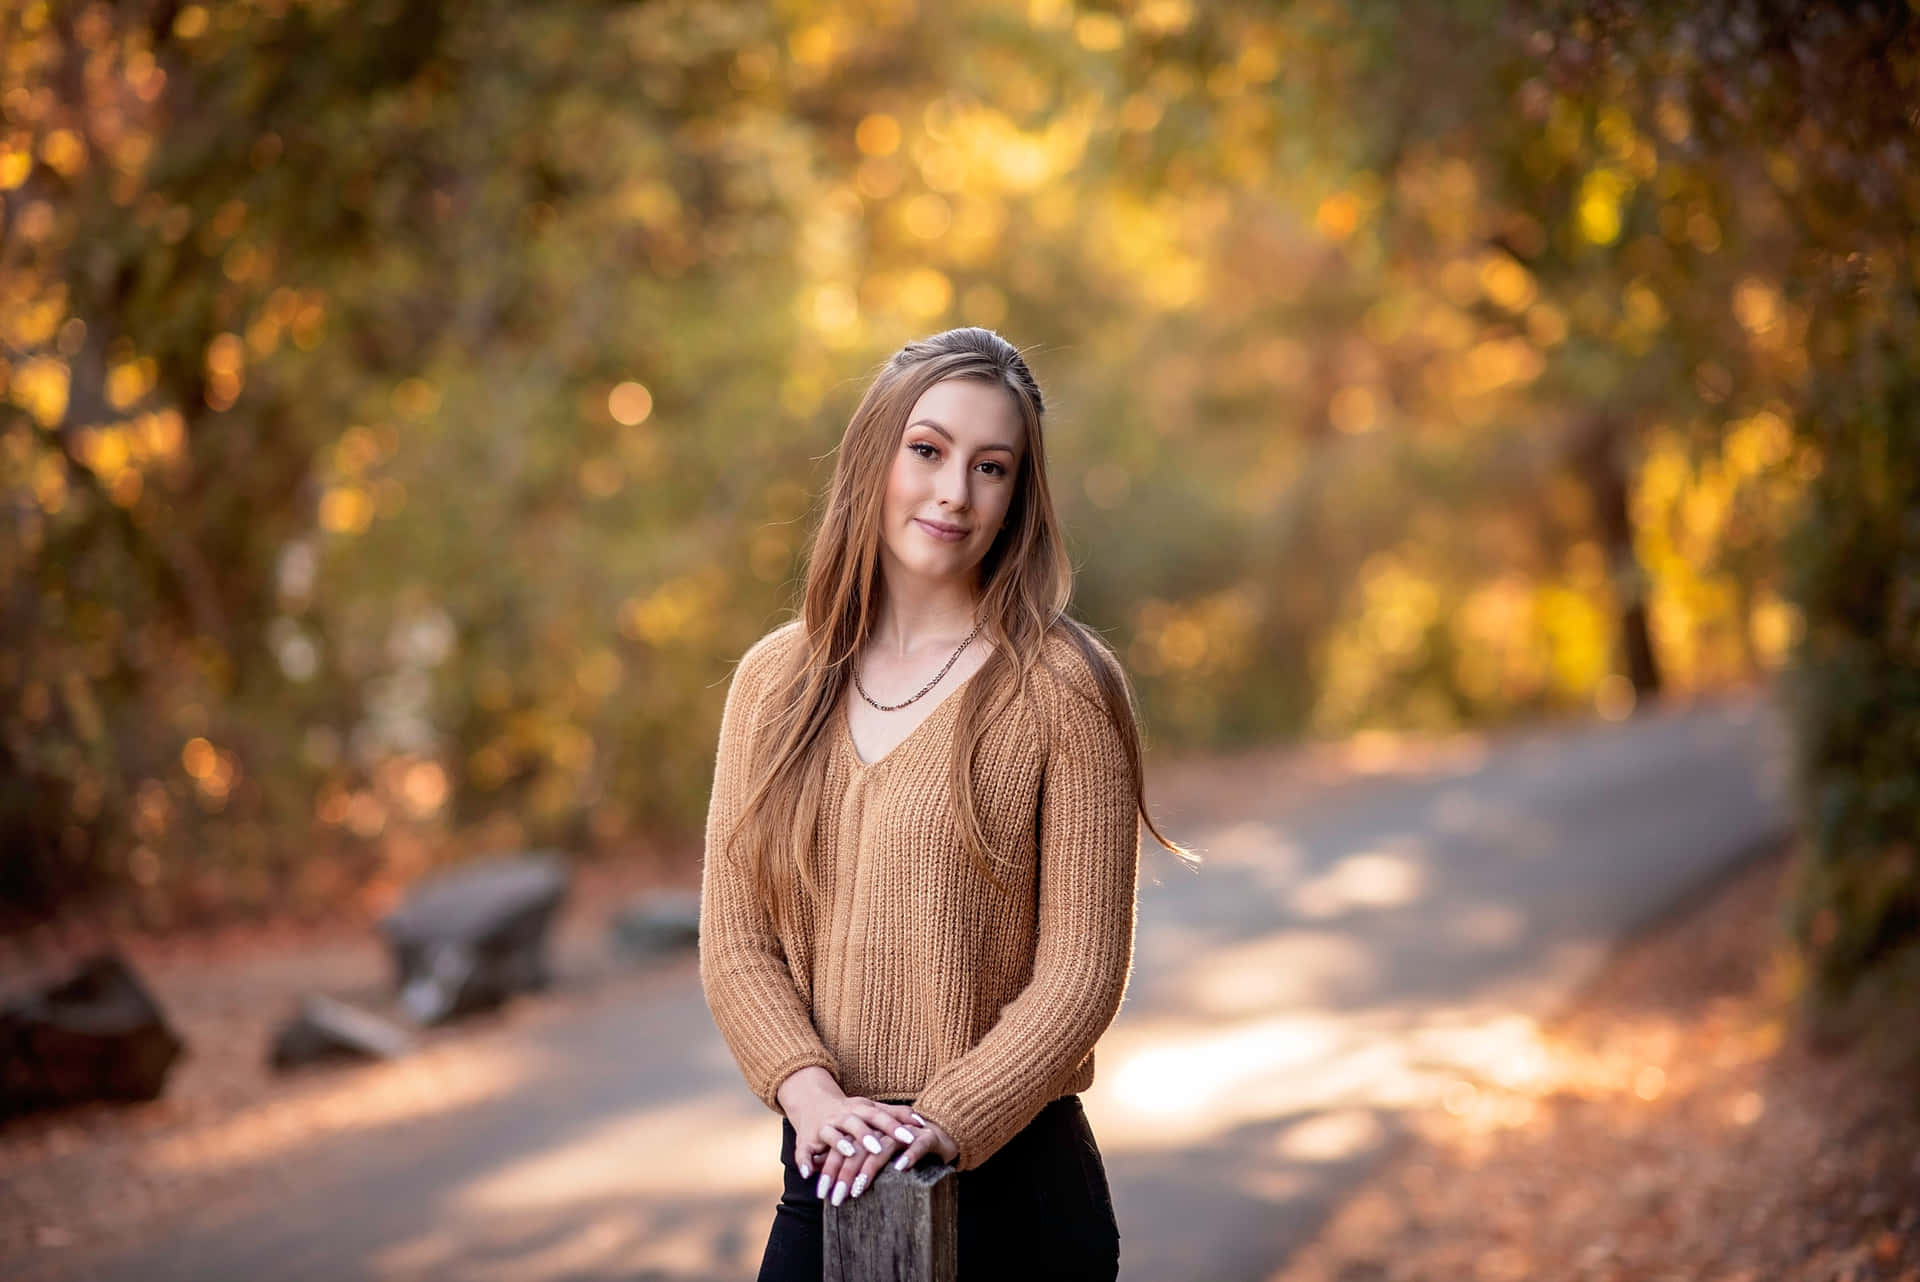 Make Lasting Memories with Fall Senior Pictures